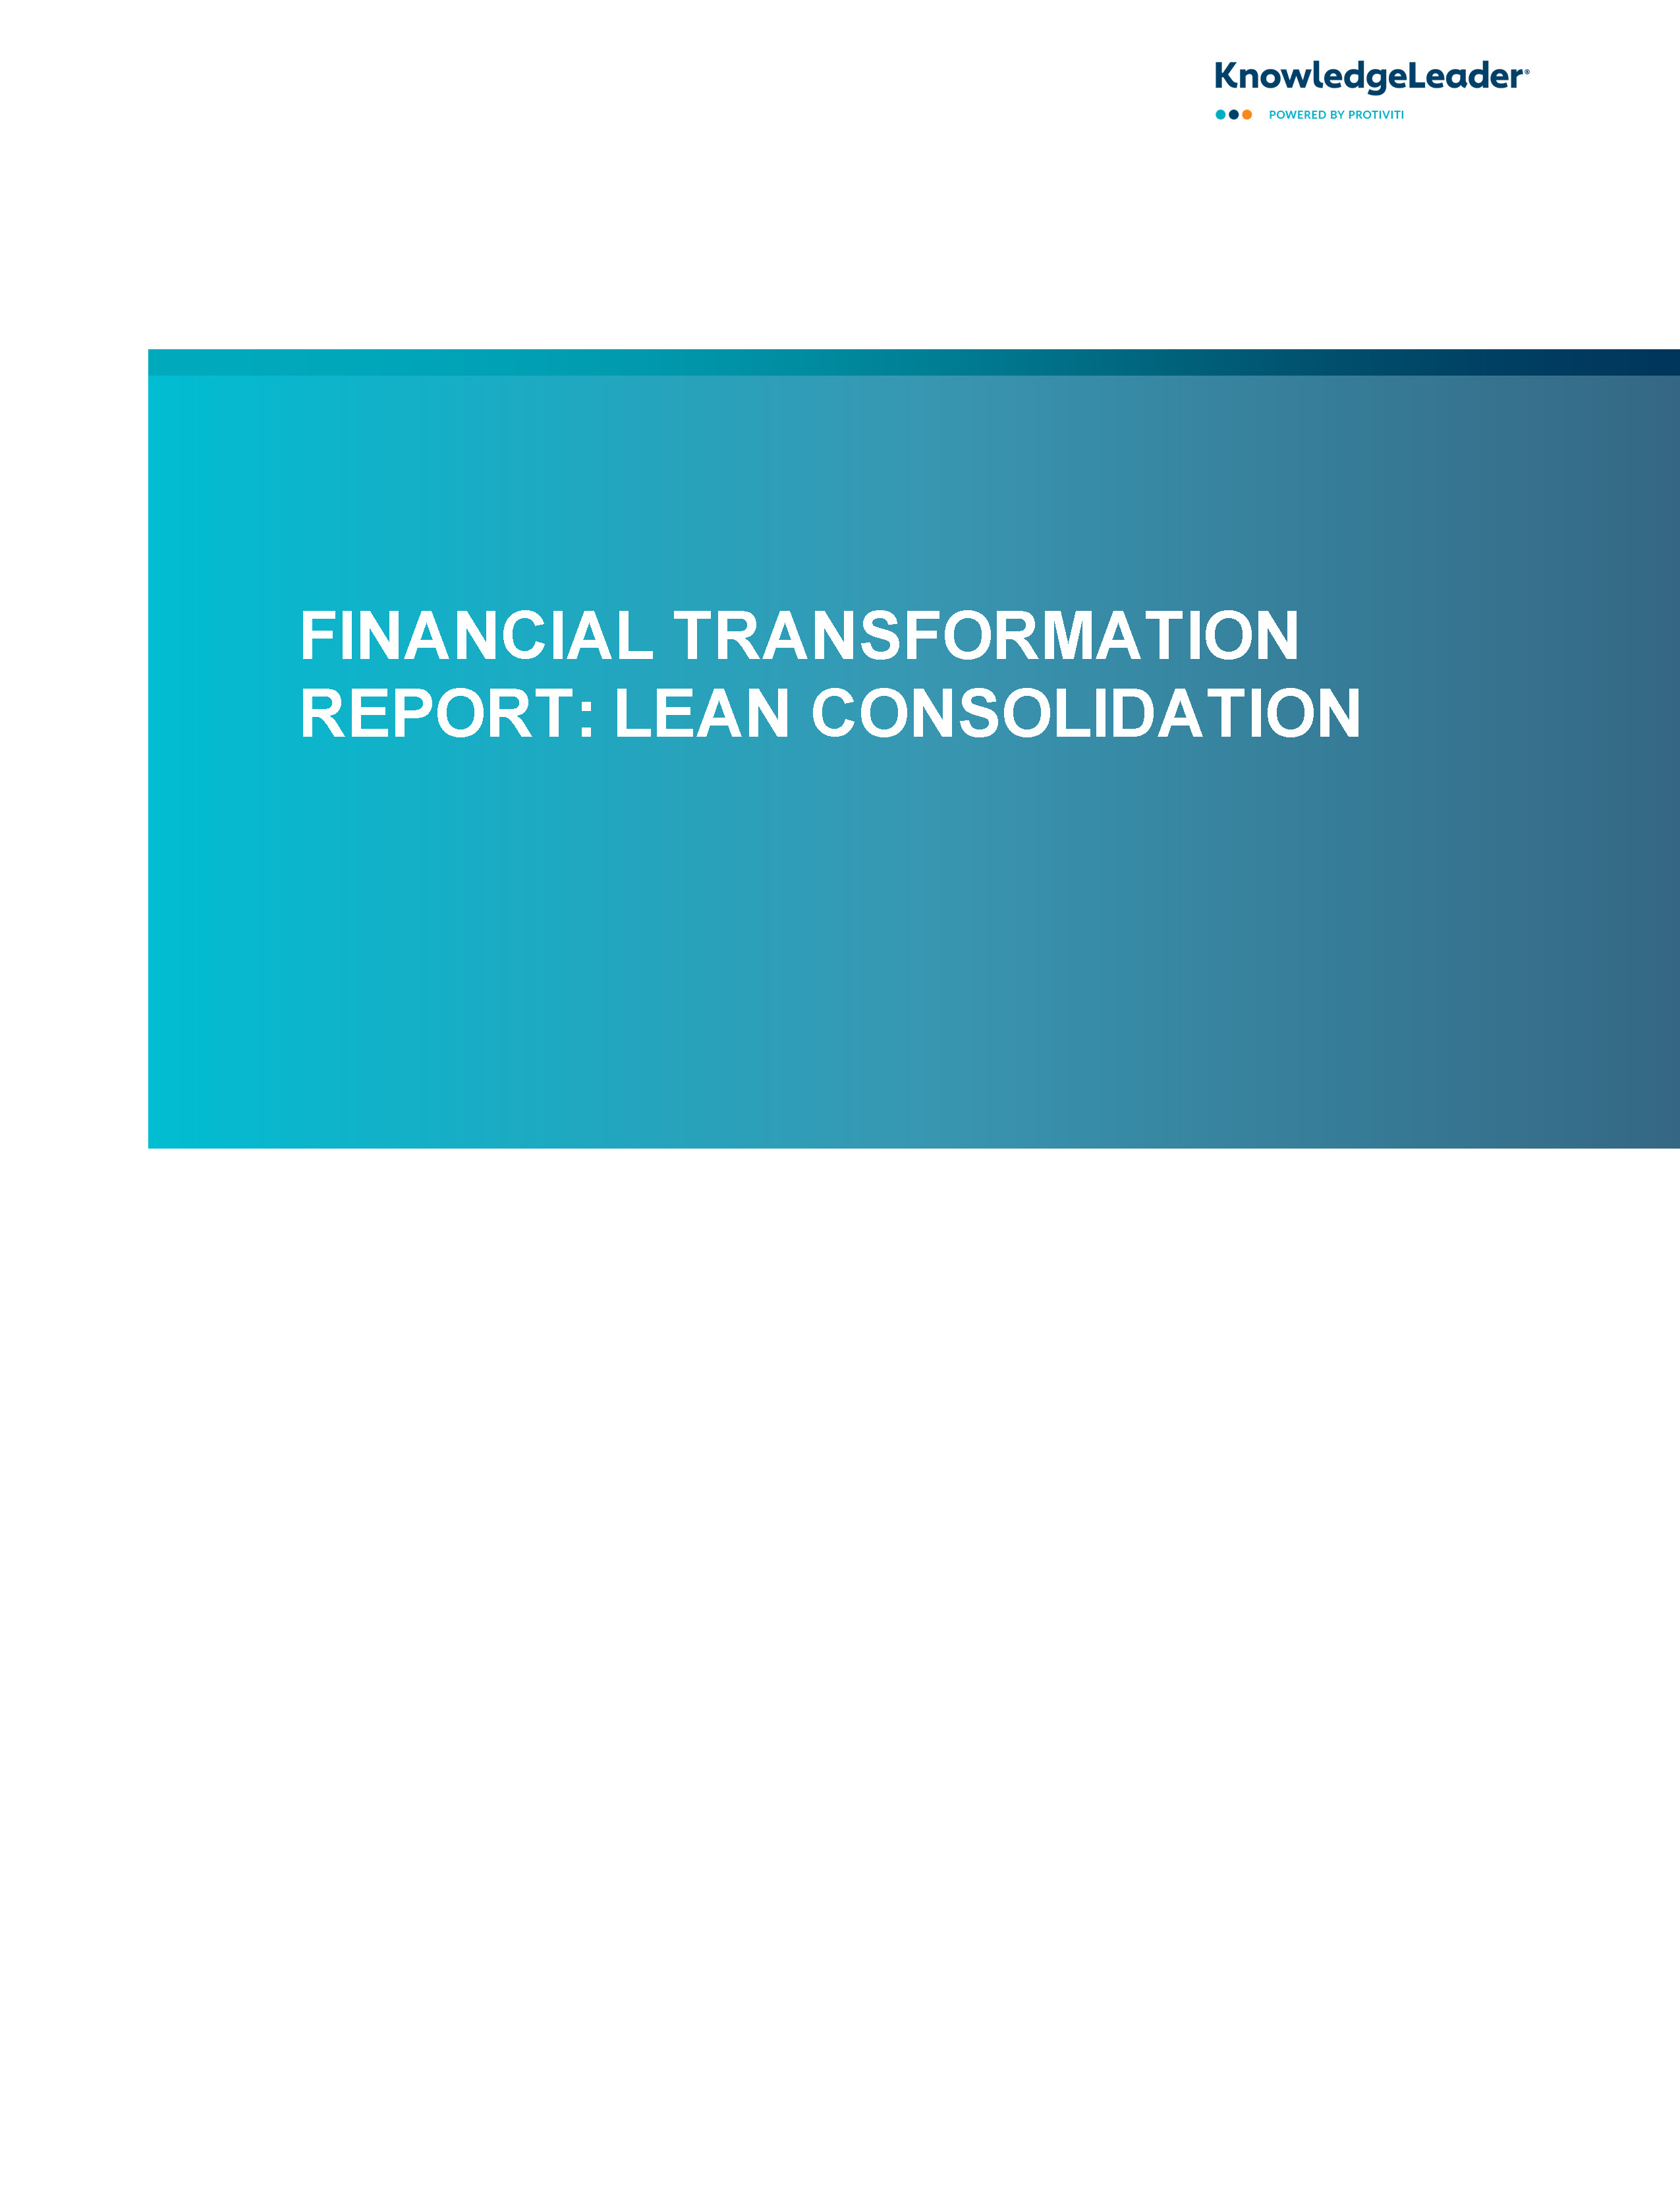 Screenshot of the first page of Financial Transformation Report - Lean Consolidation